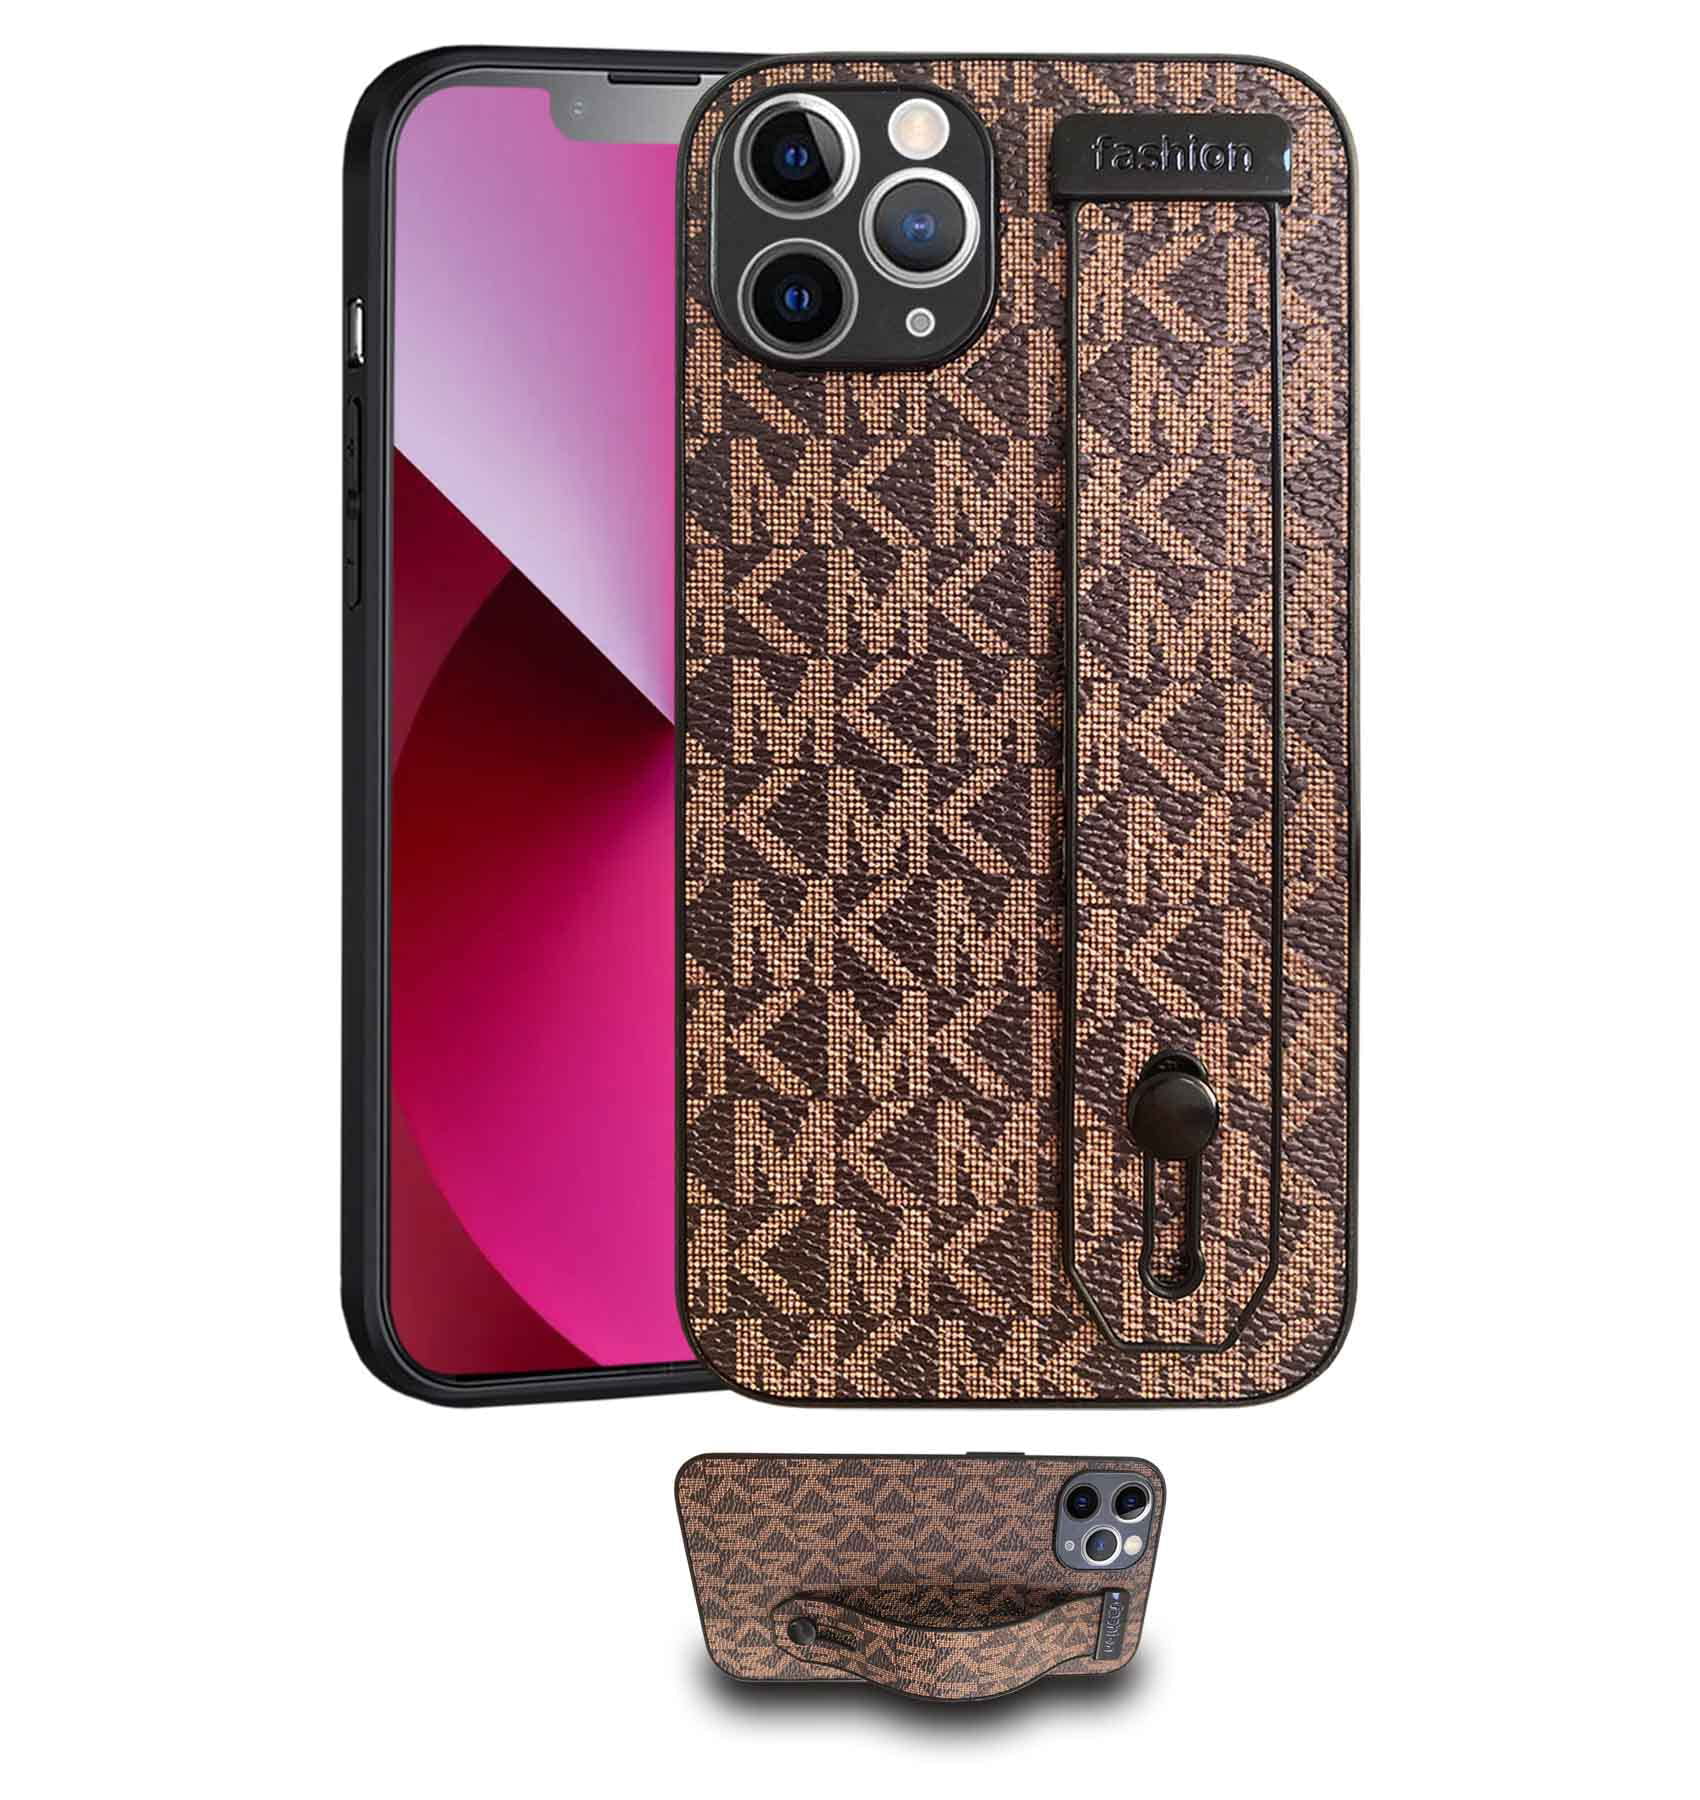  HJDGUEFS Designer Square Luxury 13 Pro Max Case for Girls  Women, Classic Pattern Retro Aesthetic Soft TPU Leather Cover Shockproof  Protection Cases for 13 pro max 6.7 inch- Hazelnut Brown 